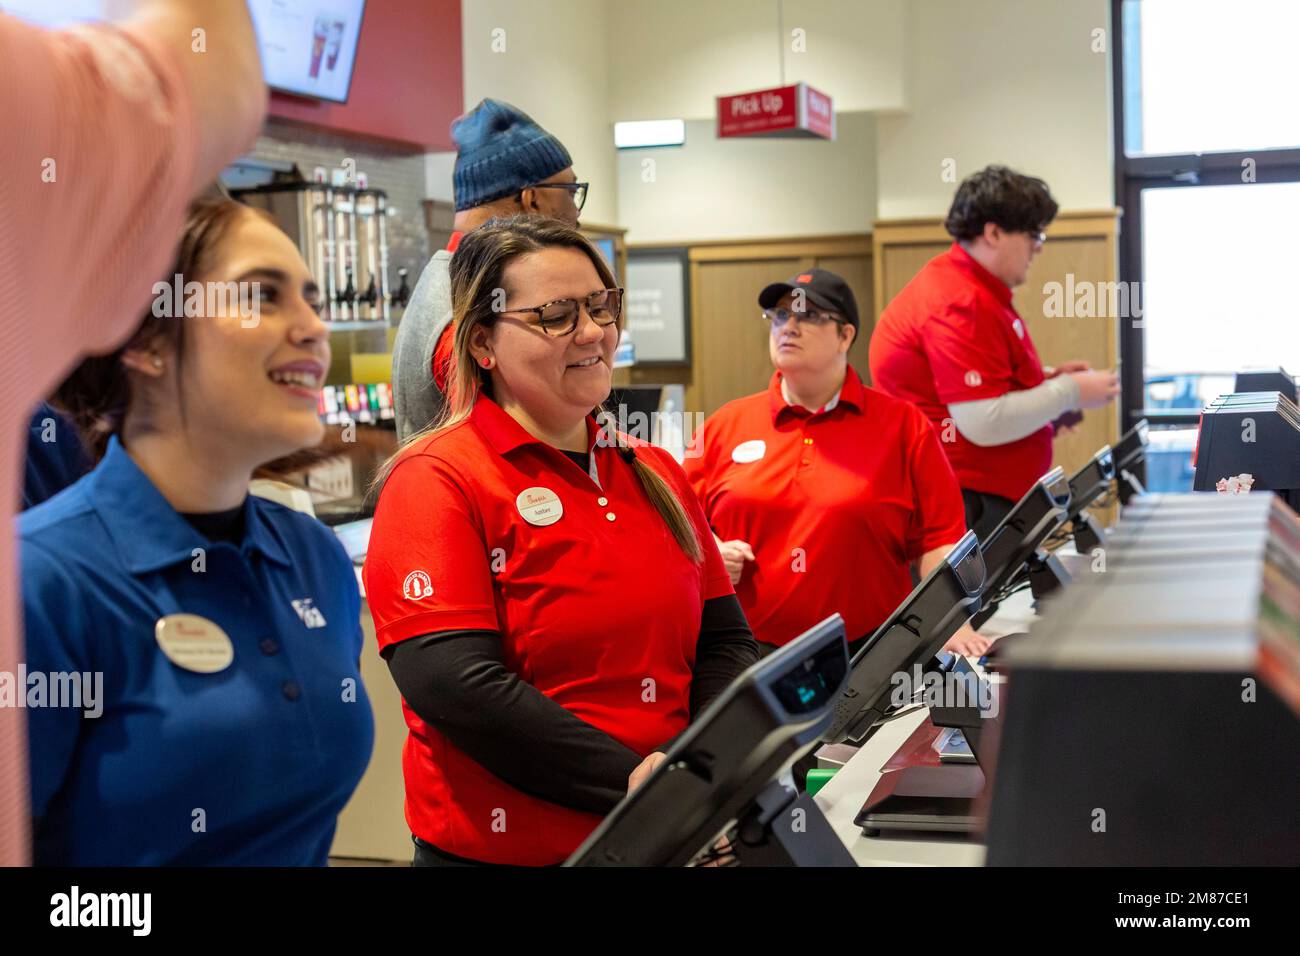 Livonia, Michigan - Workers at Chick-fil-A, on the day of the restaurant's grand opening. Workers in red shirts are the store's new staff, while those Stock Photo